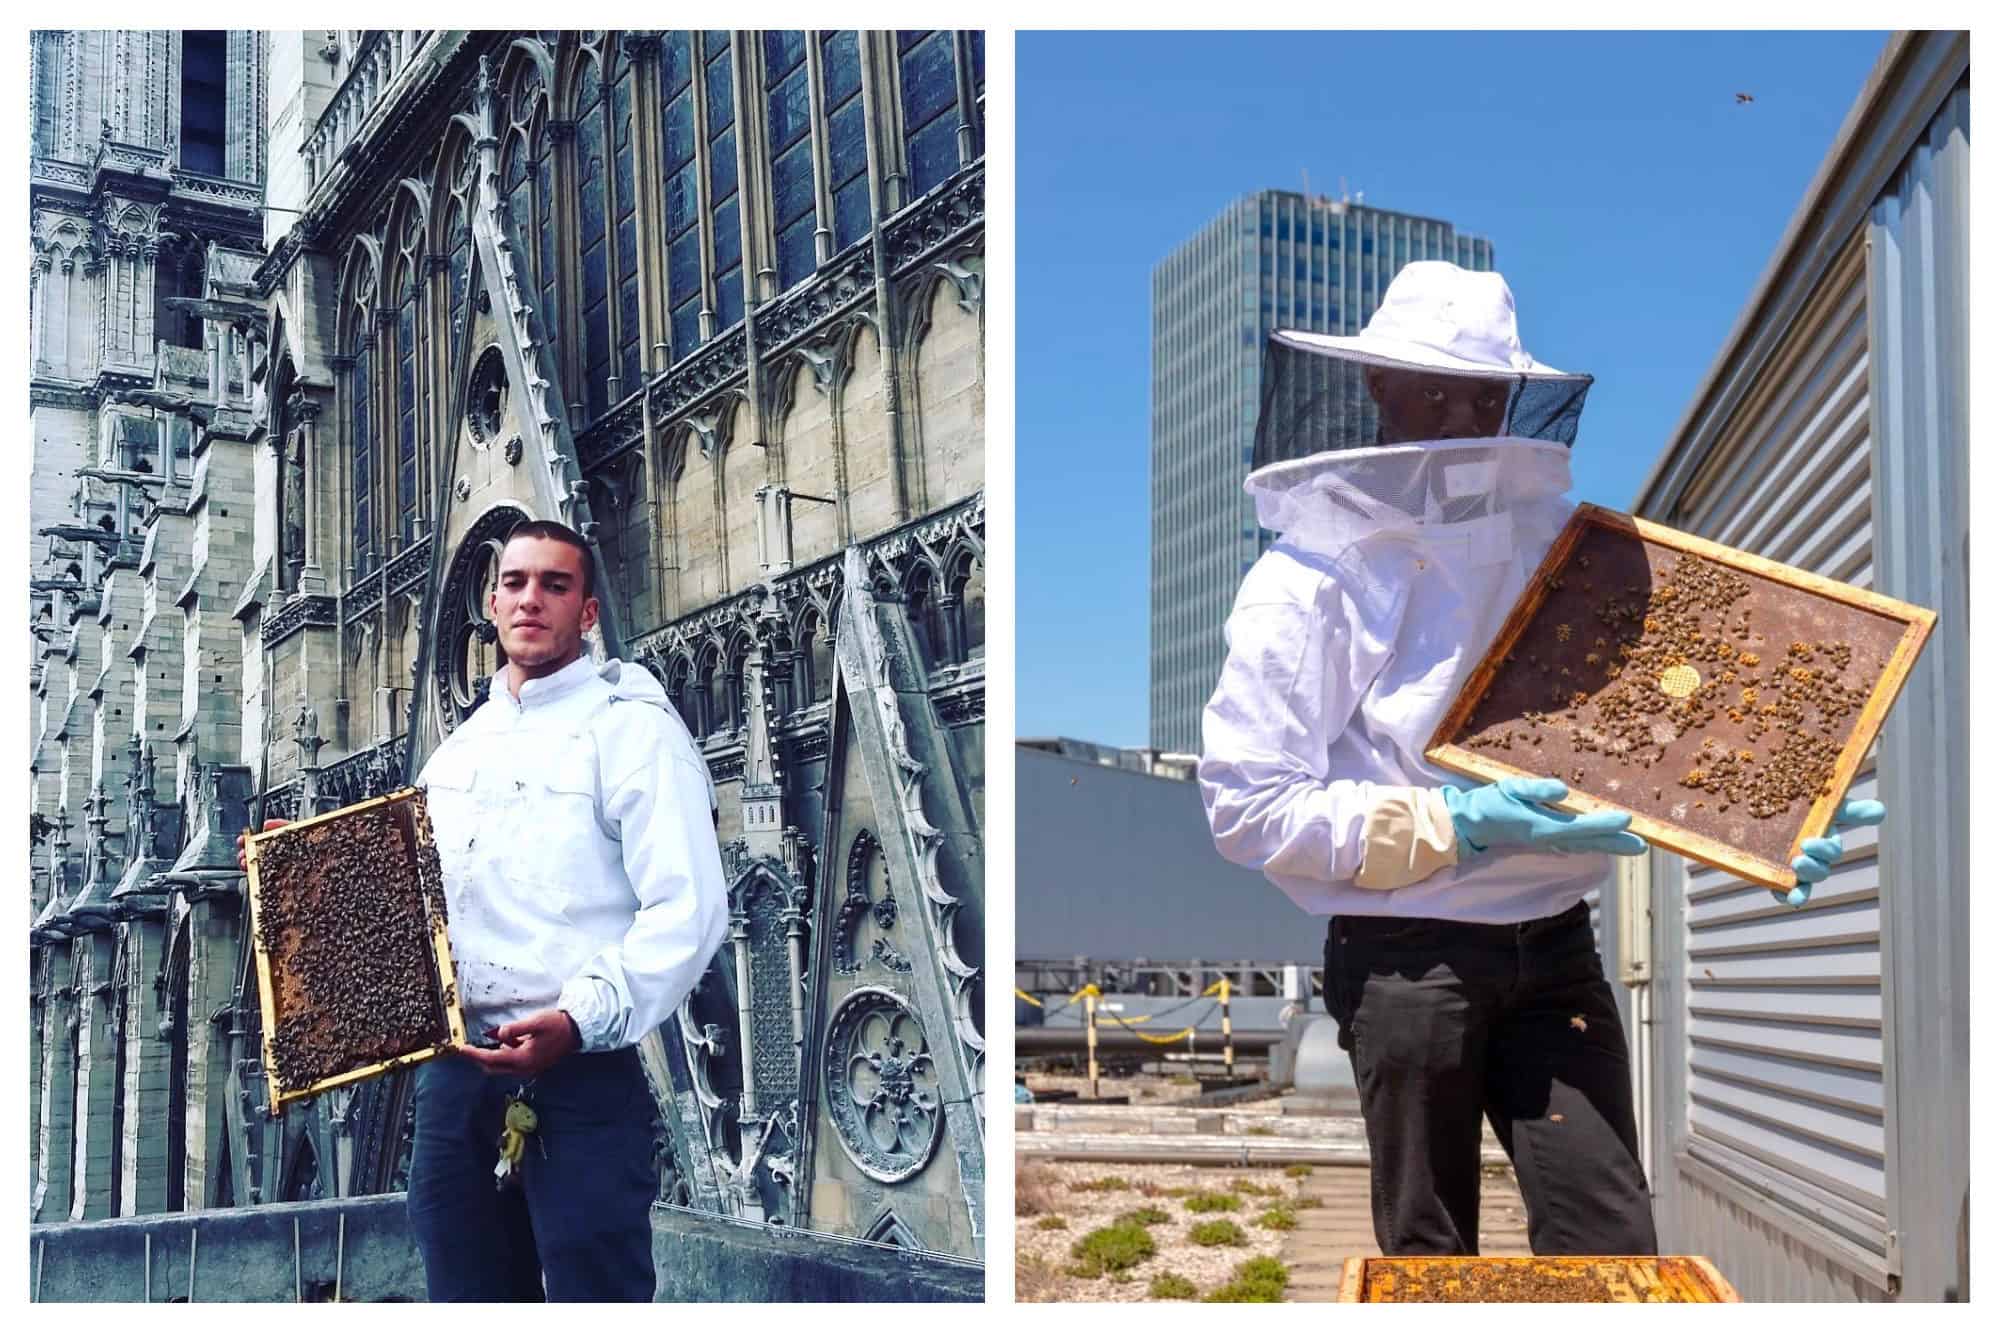 Beekeeper holding up a panel from his beehive (left and right).